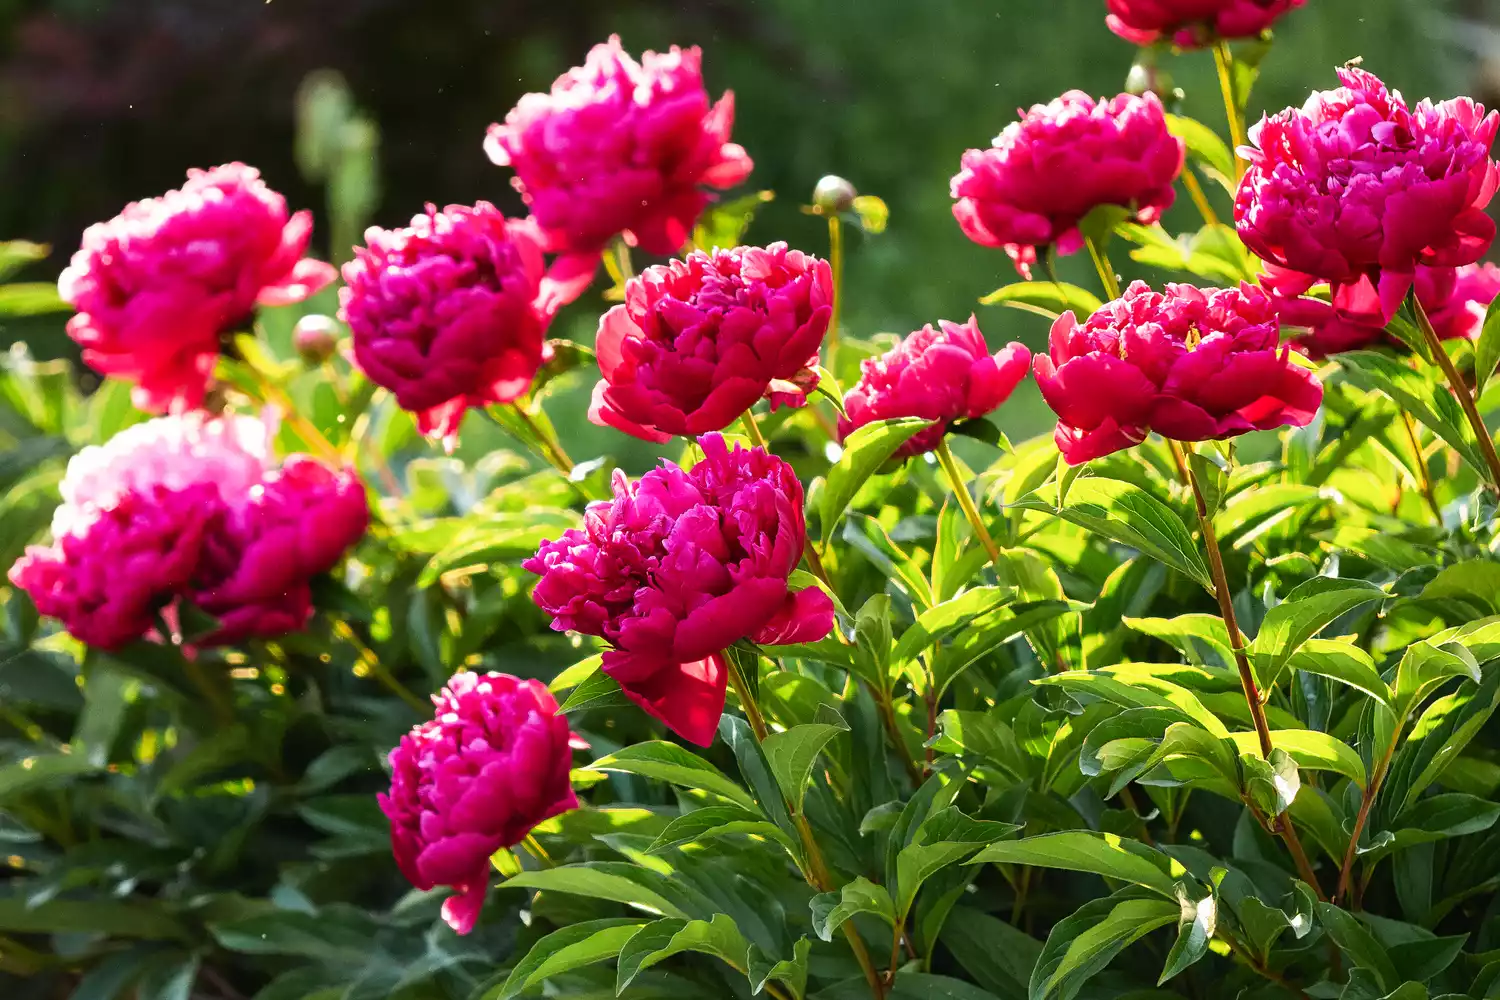 How to Grow and Care for Peonies to Ensure Beautiful Blooms Year After Year